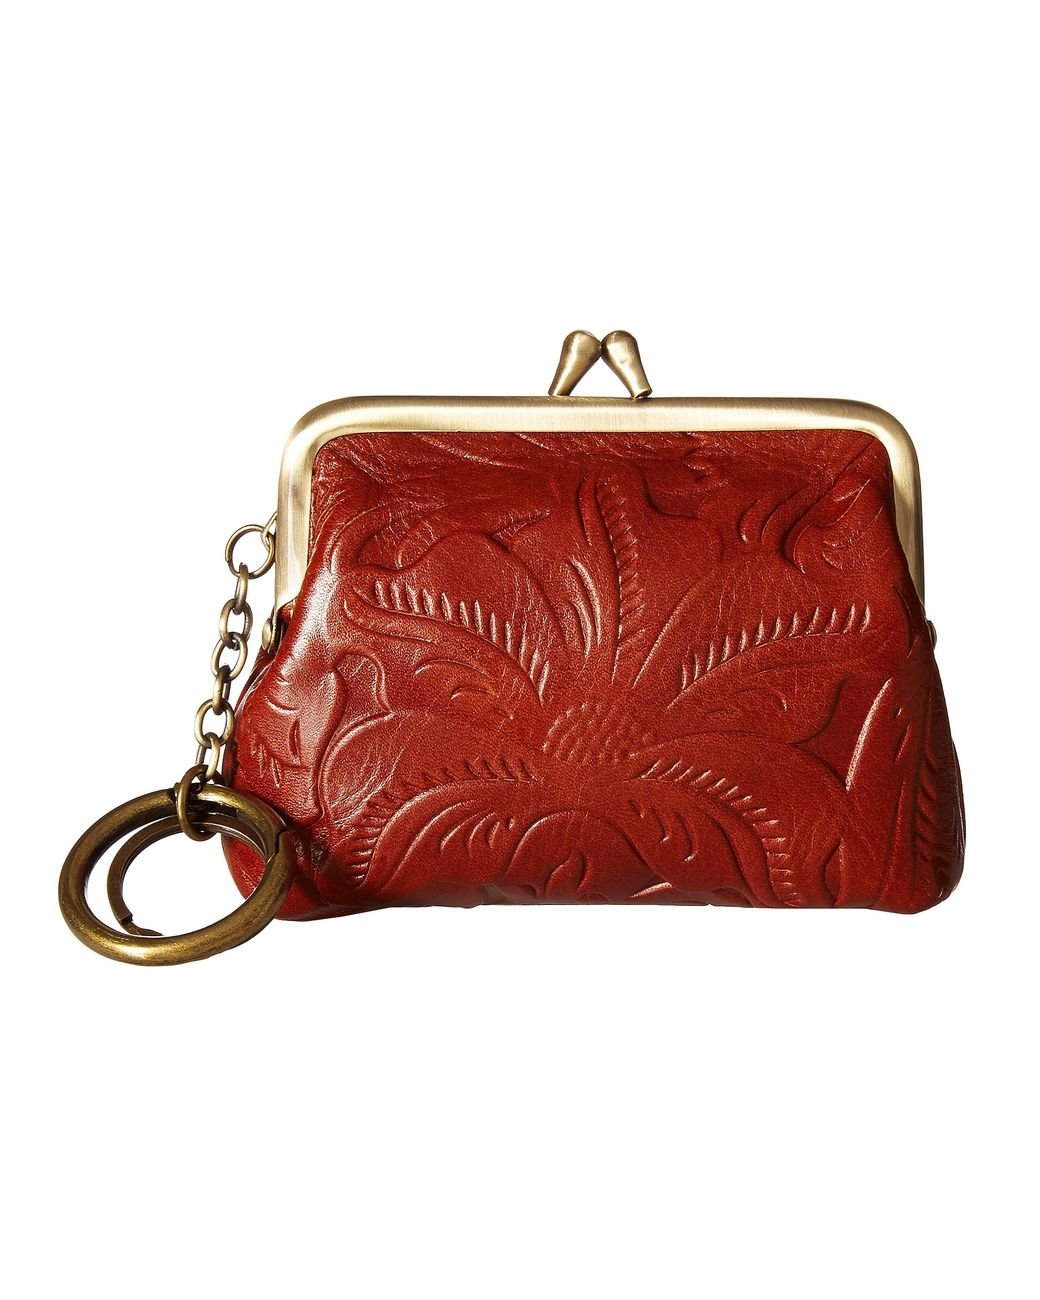 Patricia Nash Large Borse Coin Purse in Red | Lyst